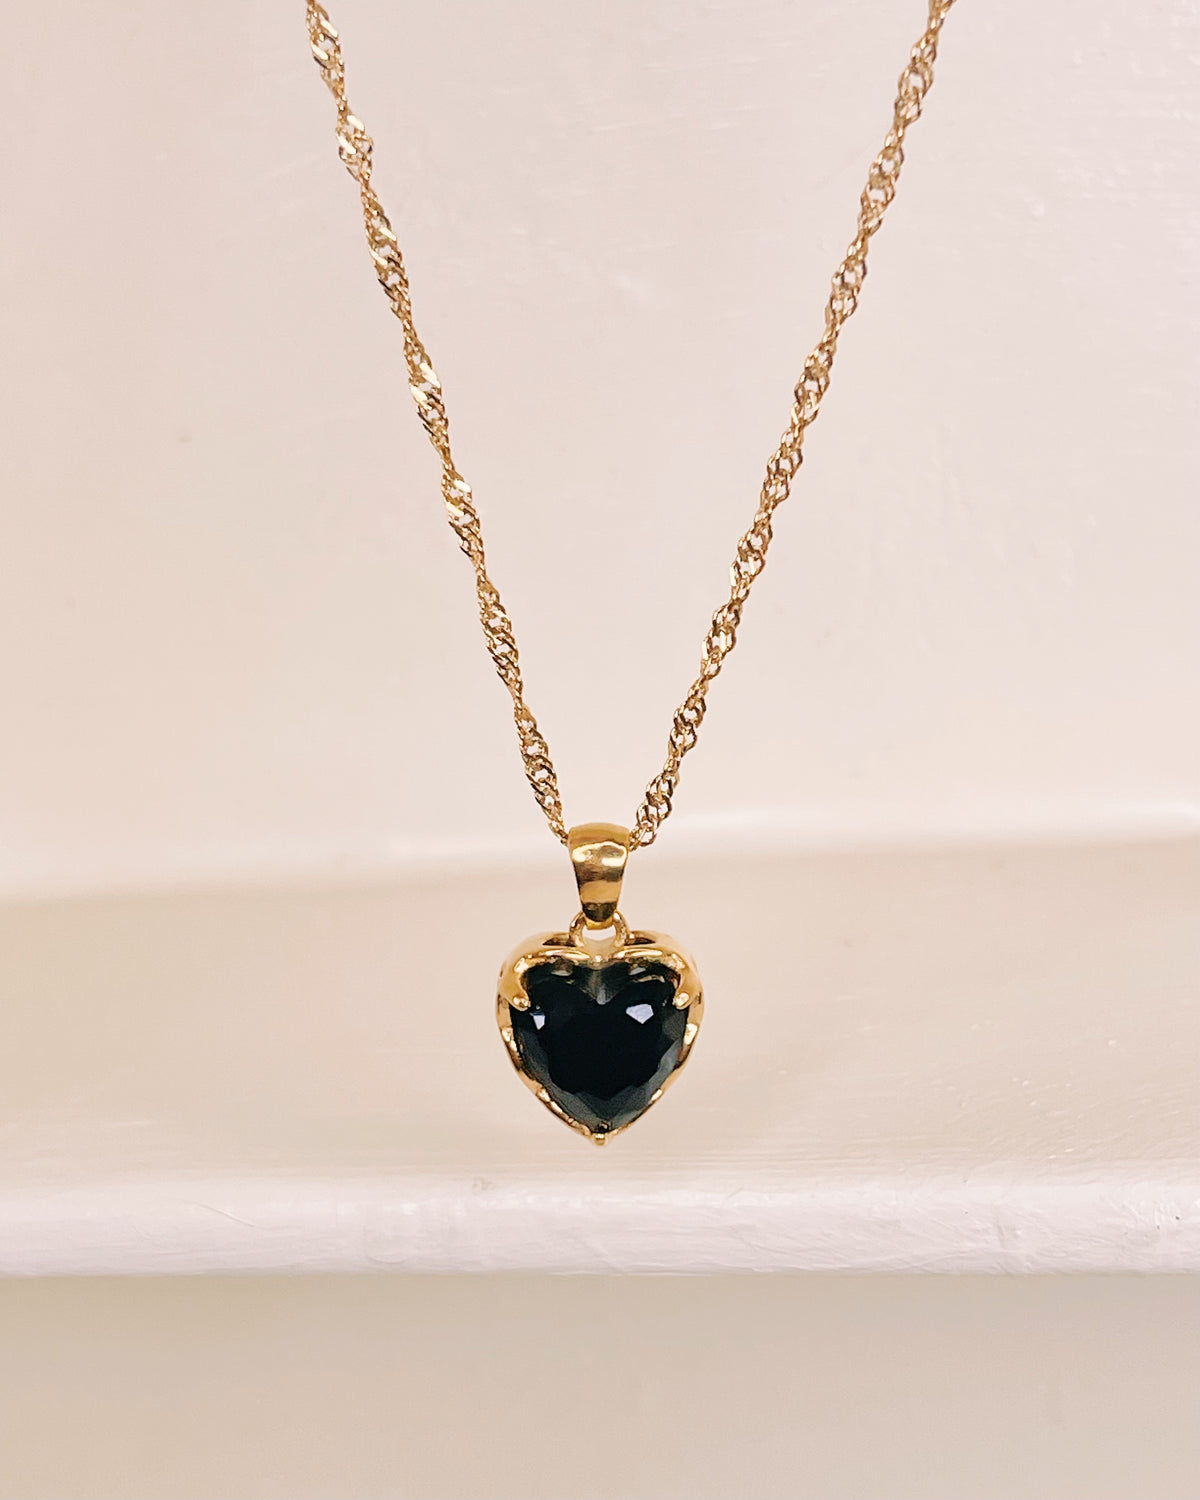 Cameron Black Stone Heart Shaped Pendant Twisted Chain Gold Necklace